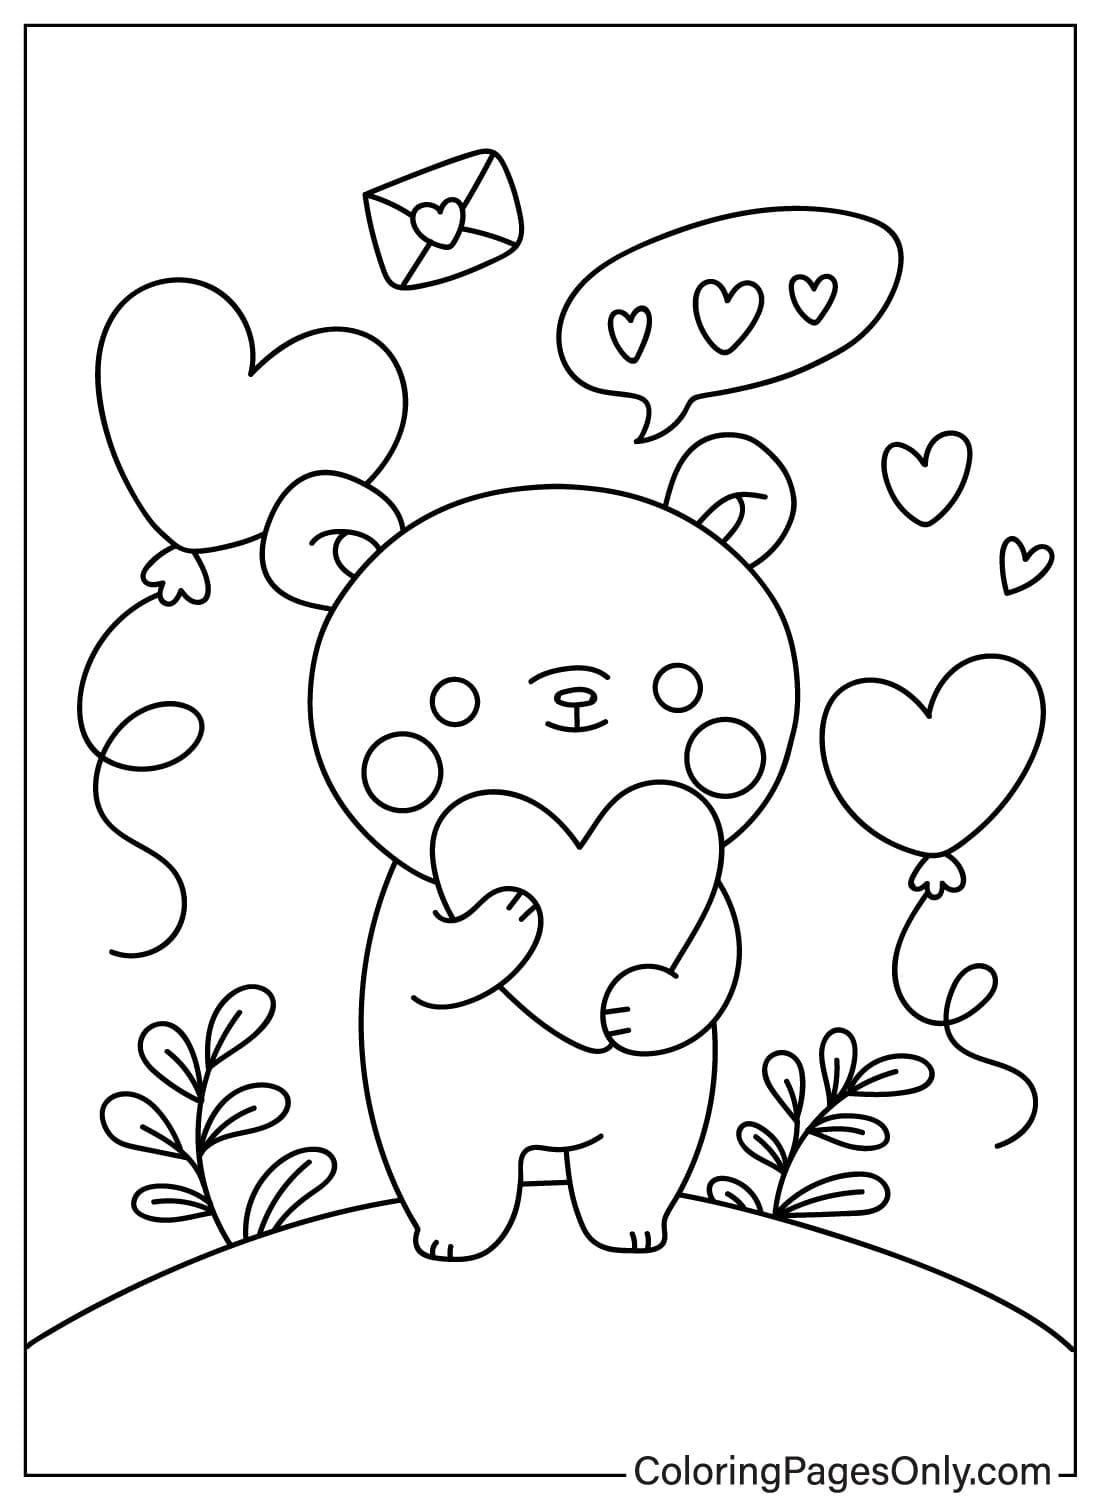 Valentines Day Coloring Page Free from Valentine's Day